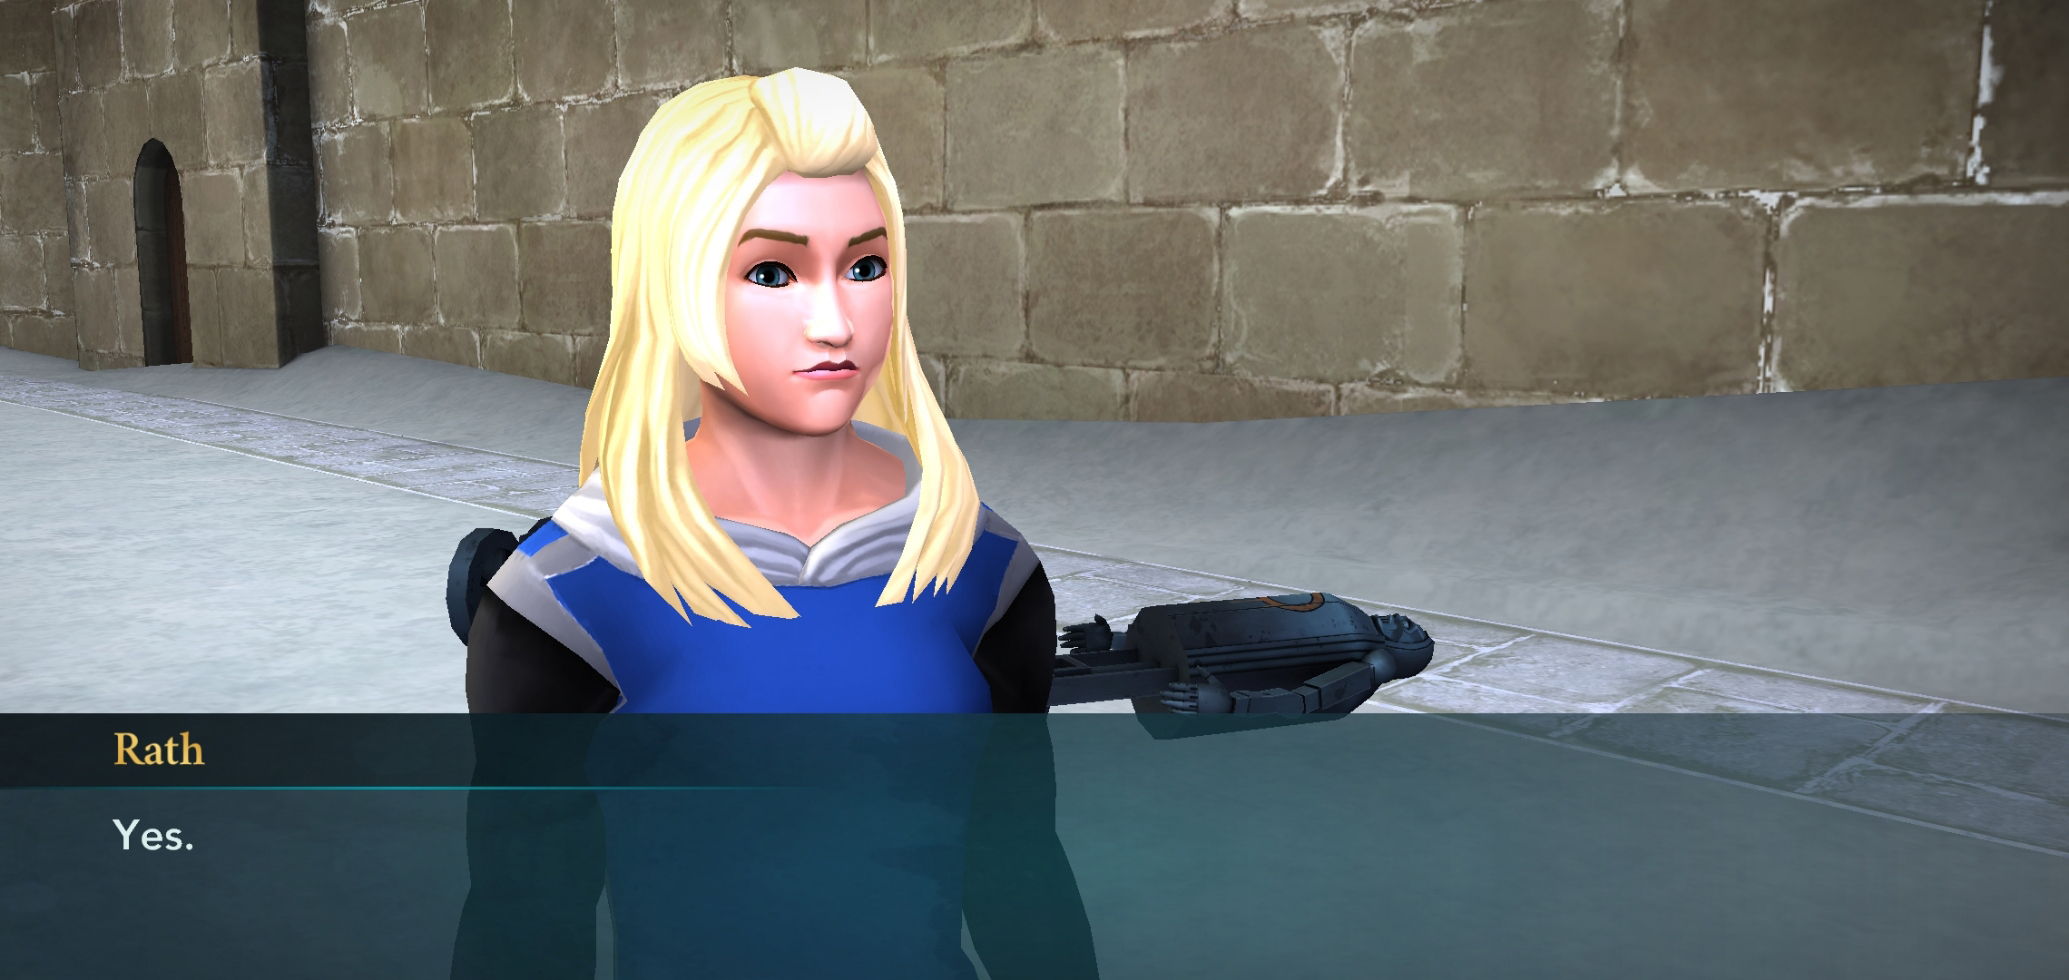 Erika Rath is a woman of few words in "Harry Potter: Hogwarts Mystery".